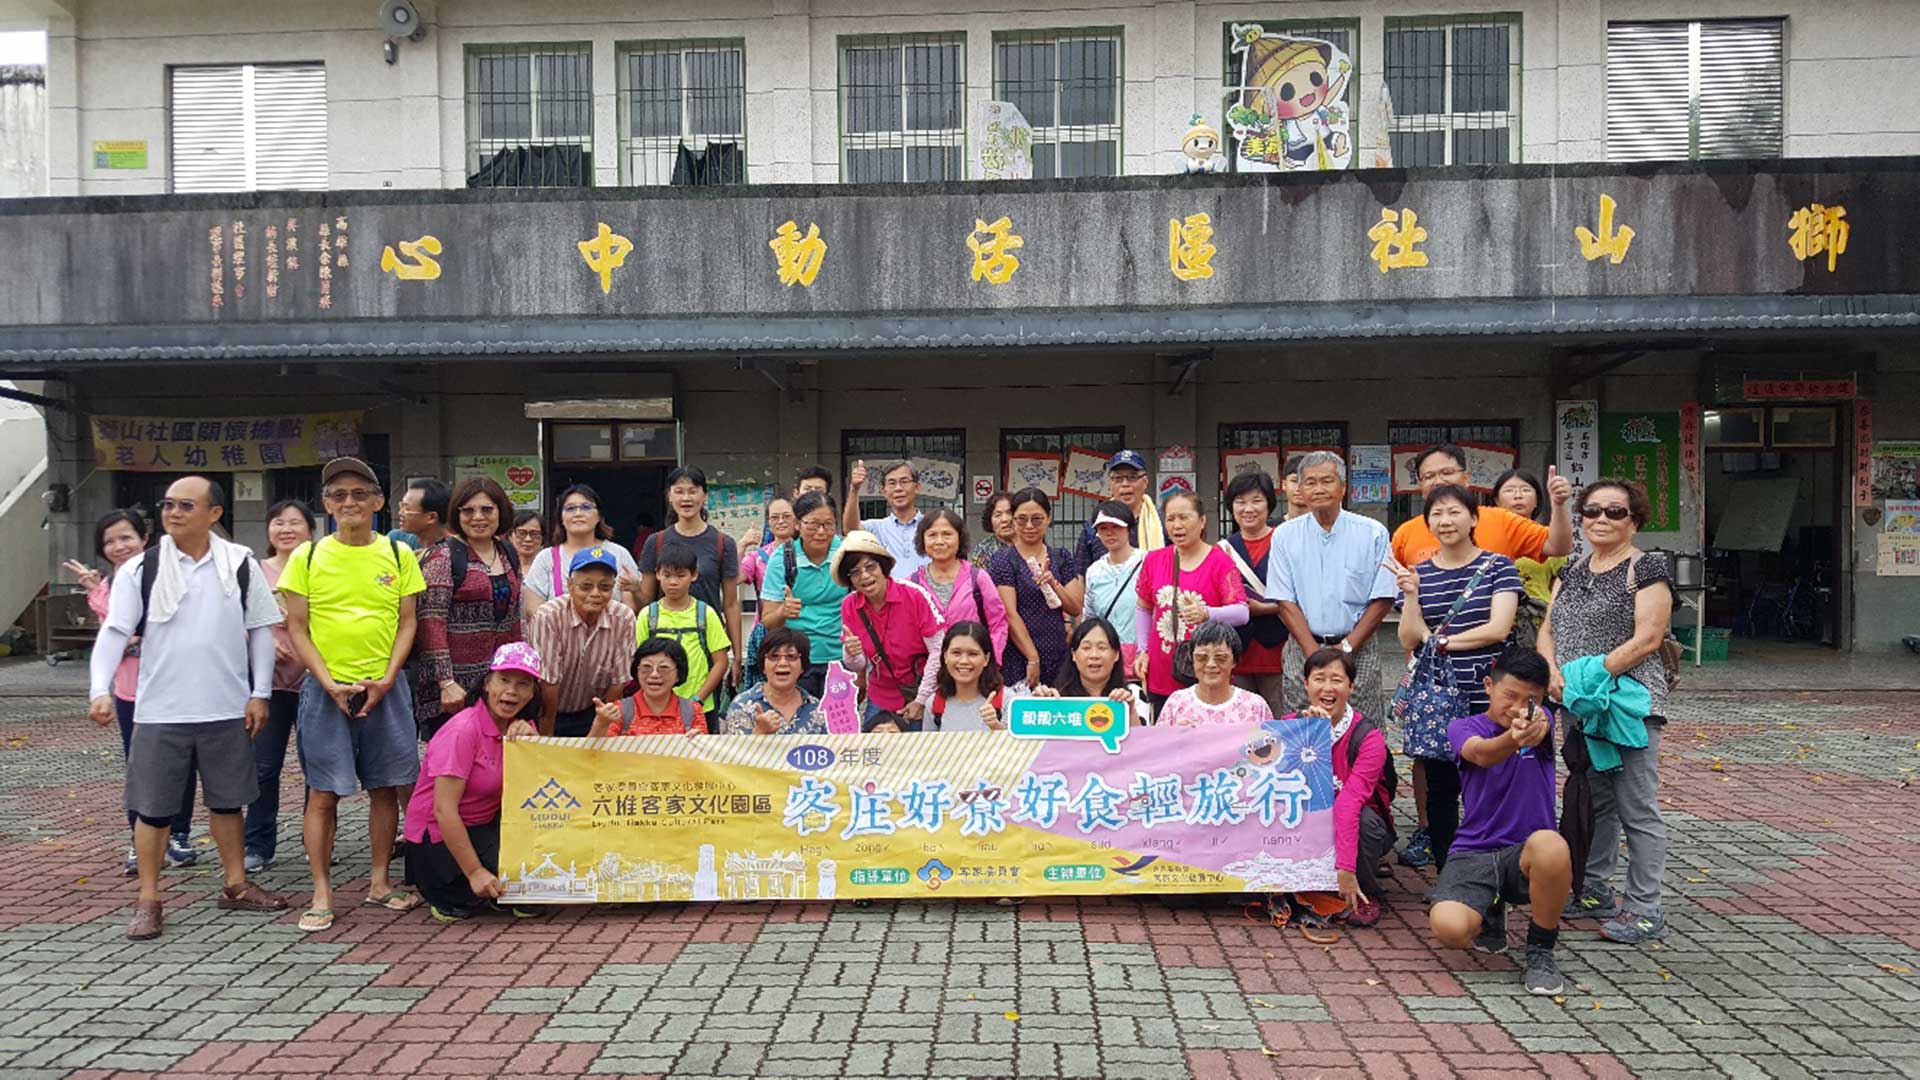 Liudui Hakka light trip with a pleasant tour and good food—group photos taken in the Shishan Community Activity Center